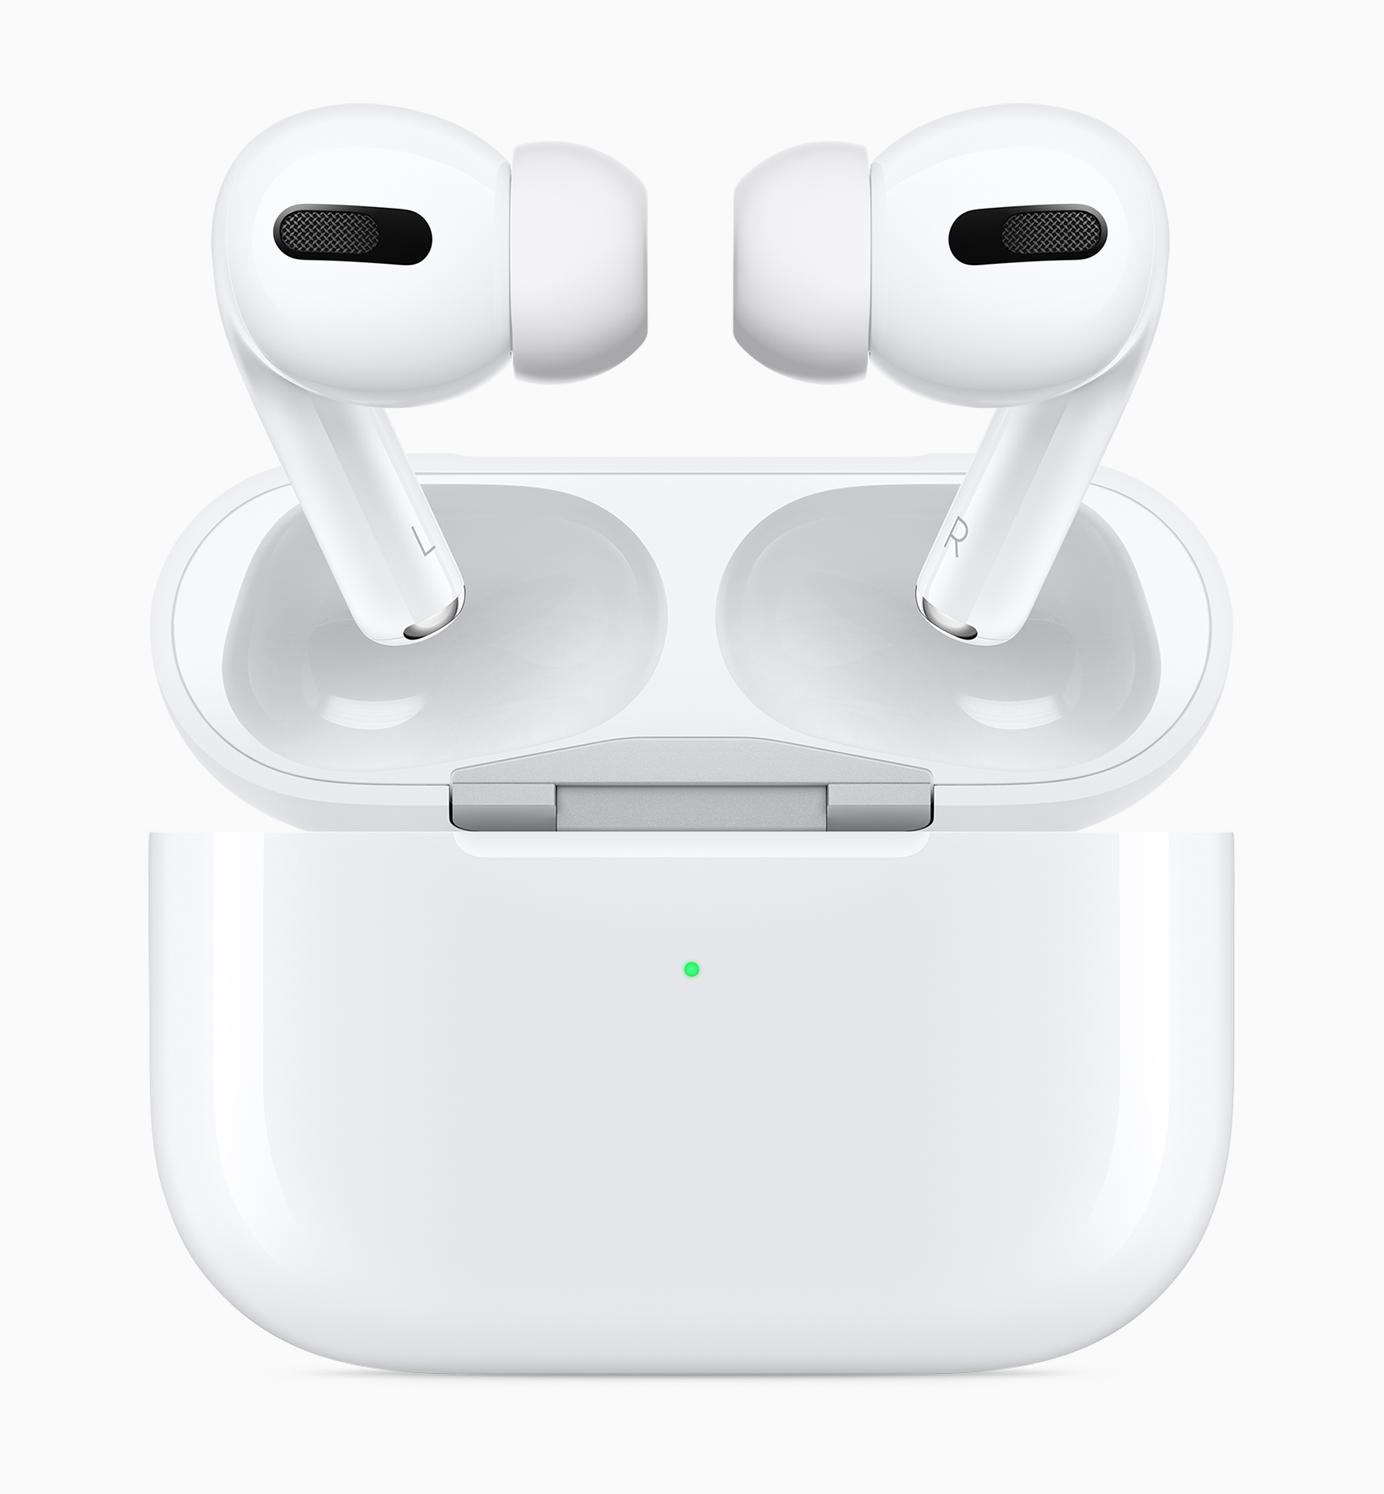 Apple introduces the AirPods Pro in new video